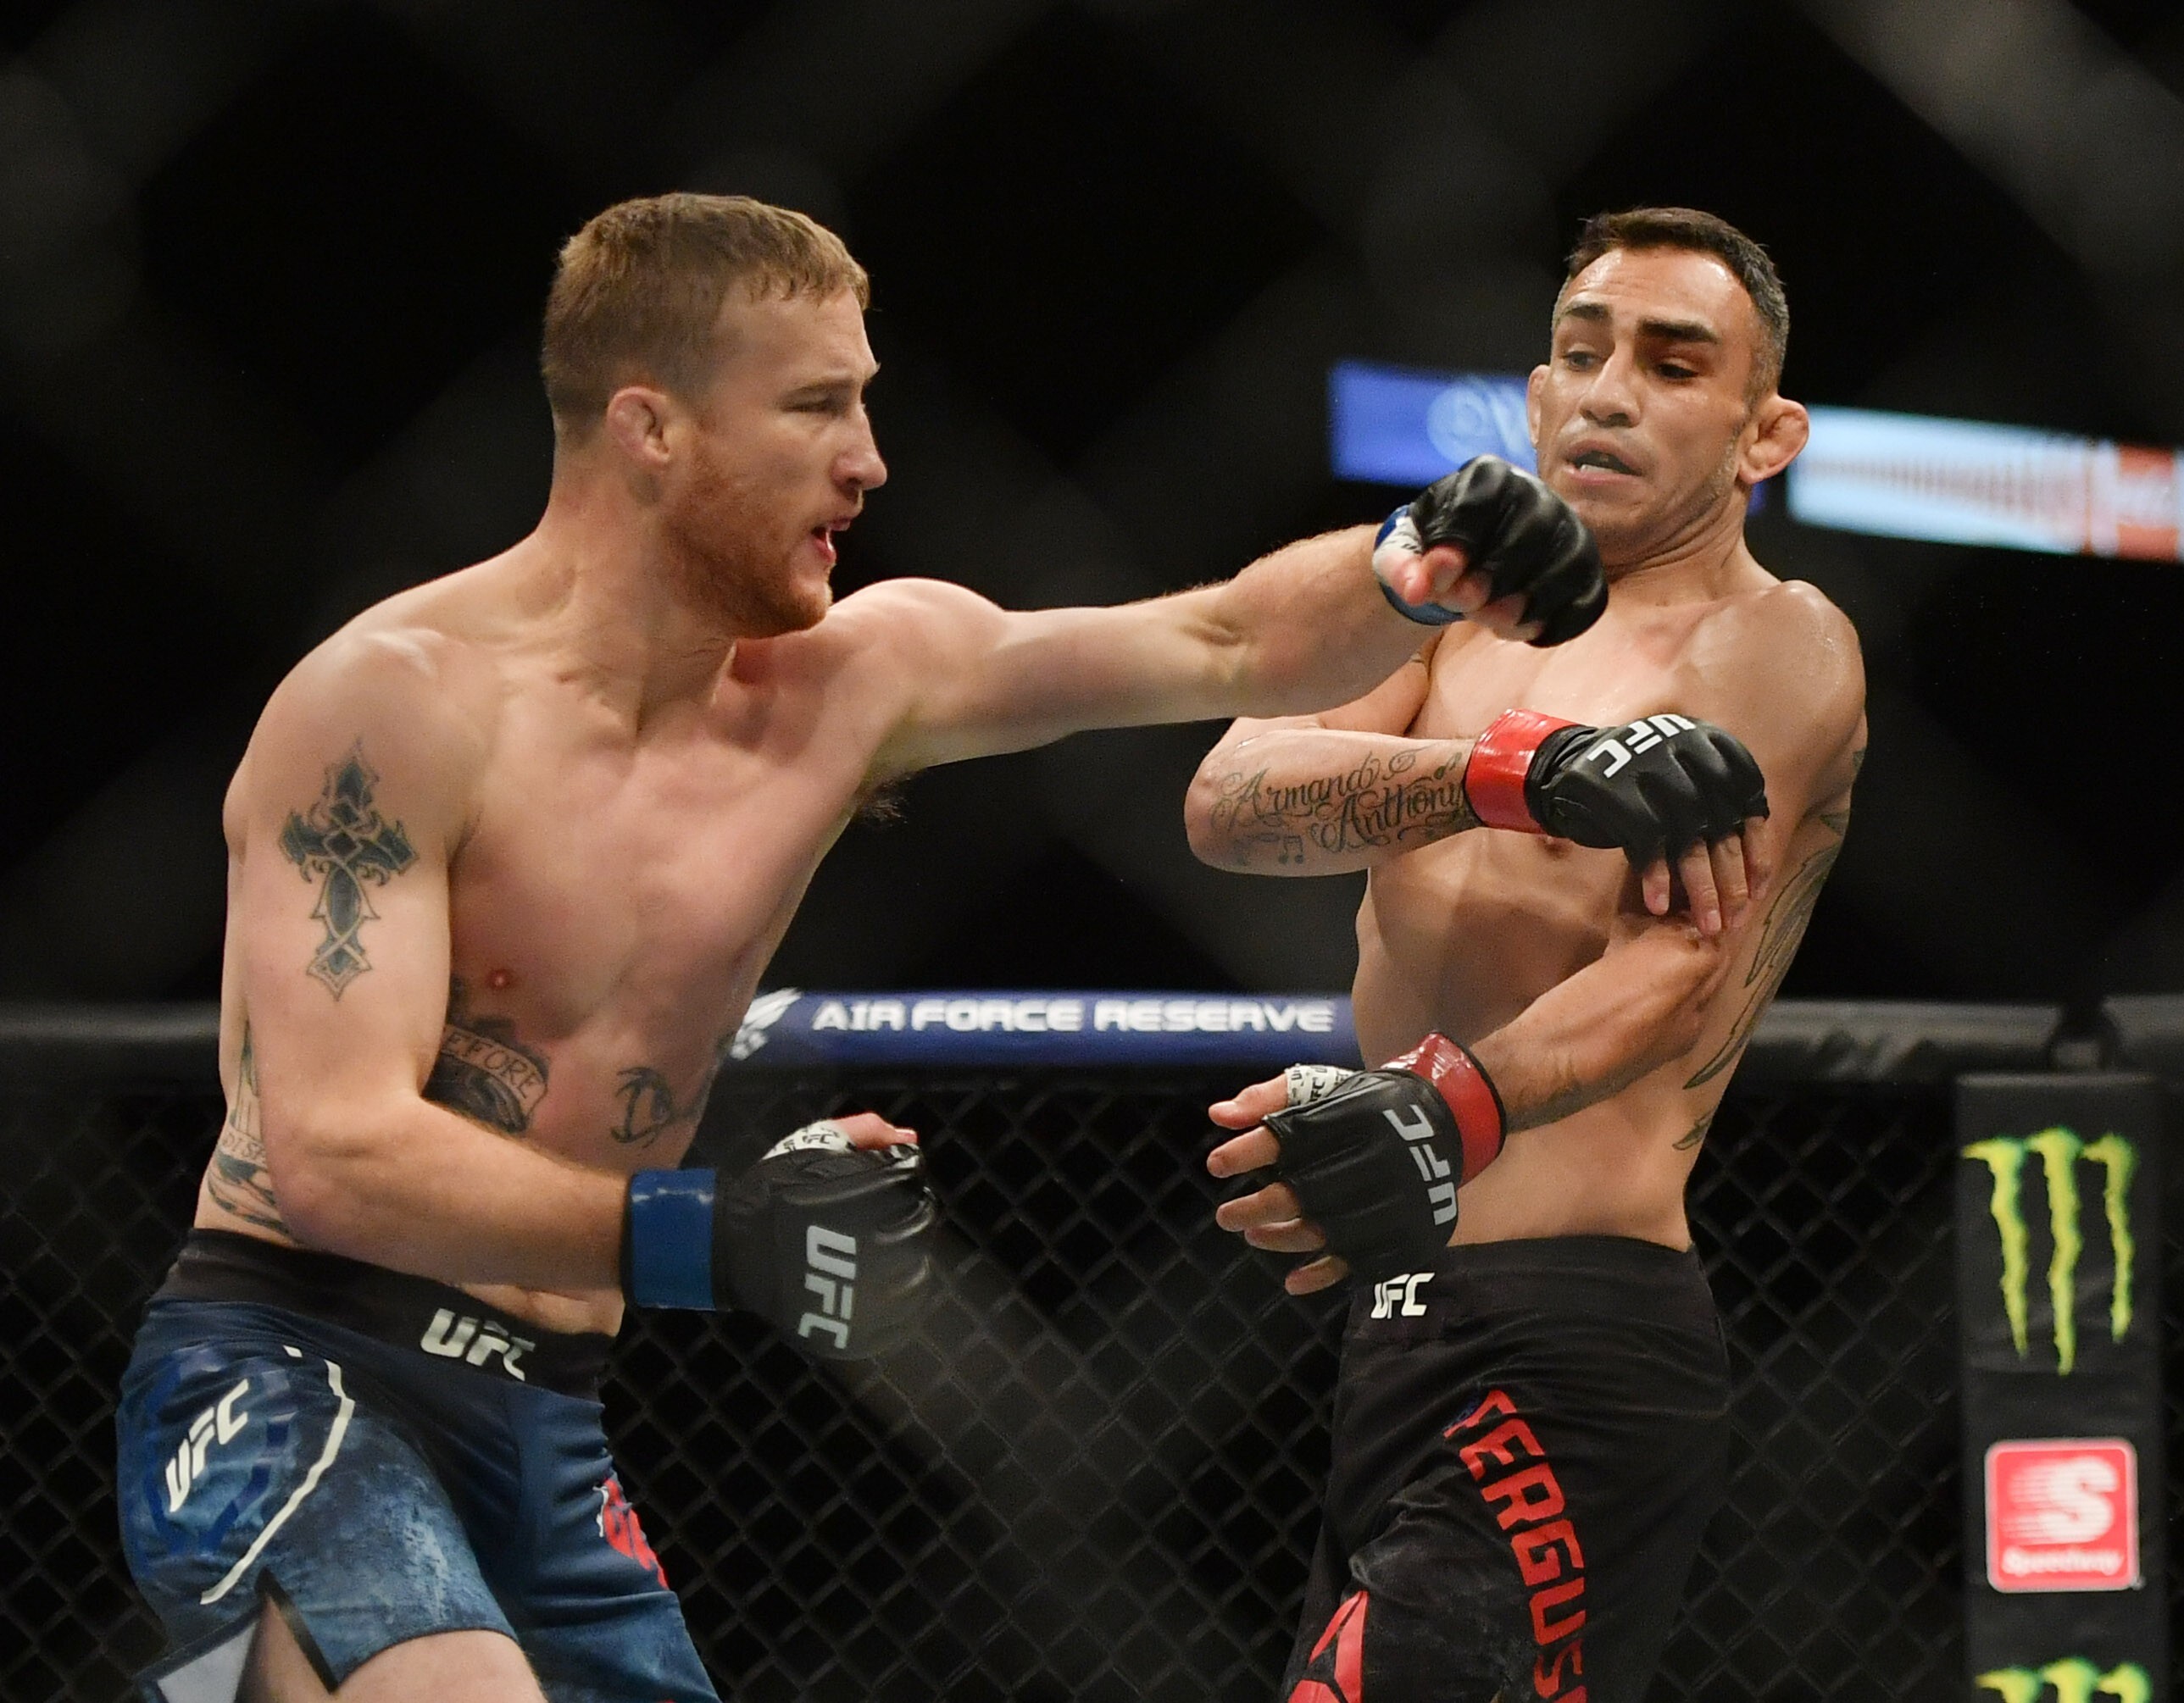 Justin Gaethje throws a left hook at Tony Ferguson. Photo: USA TODAY Sports